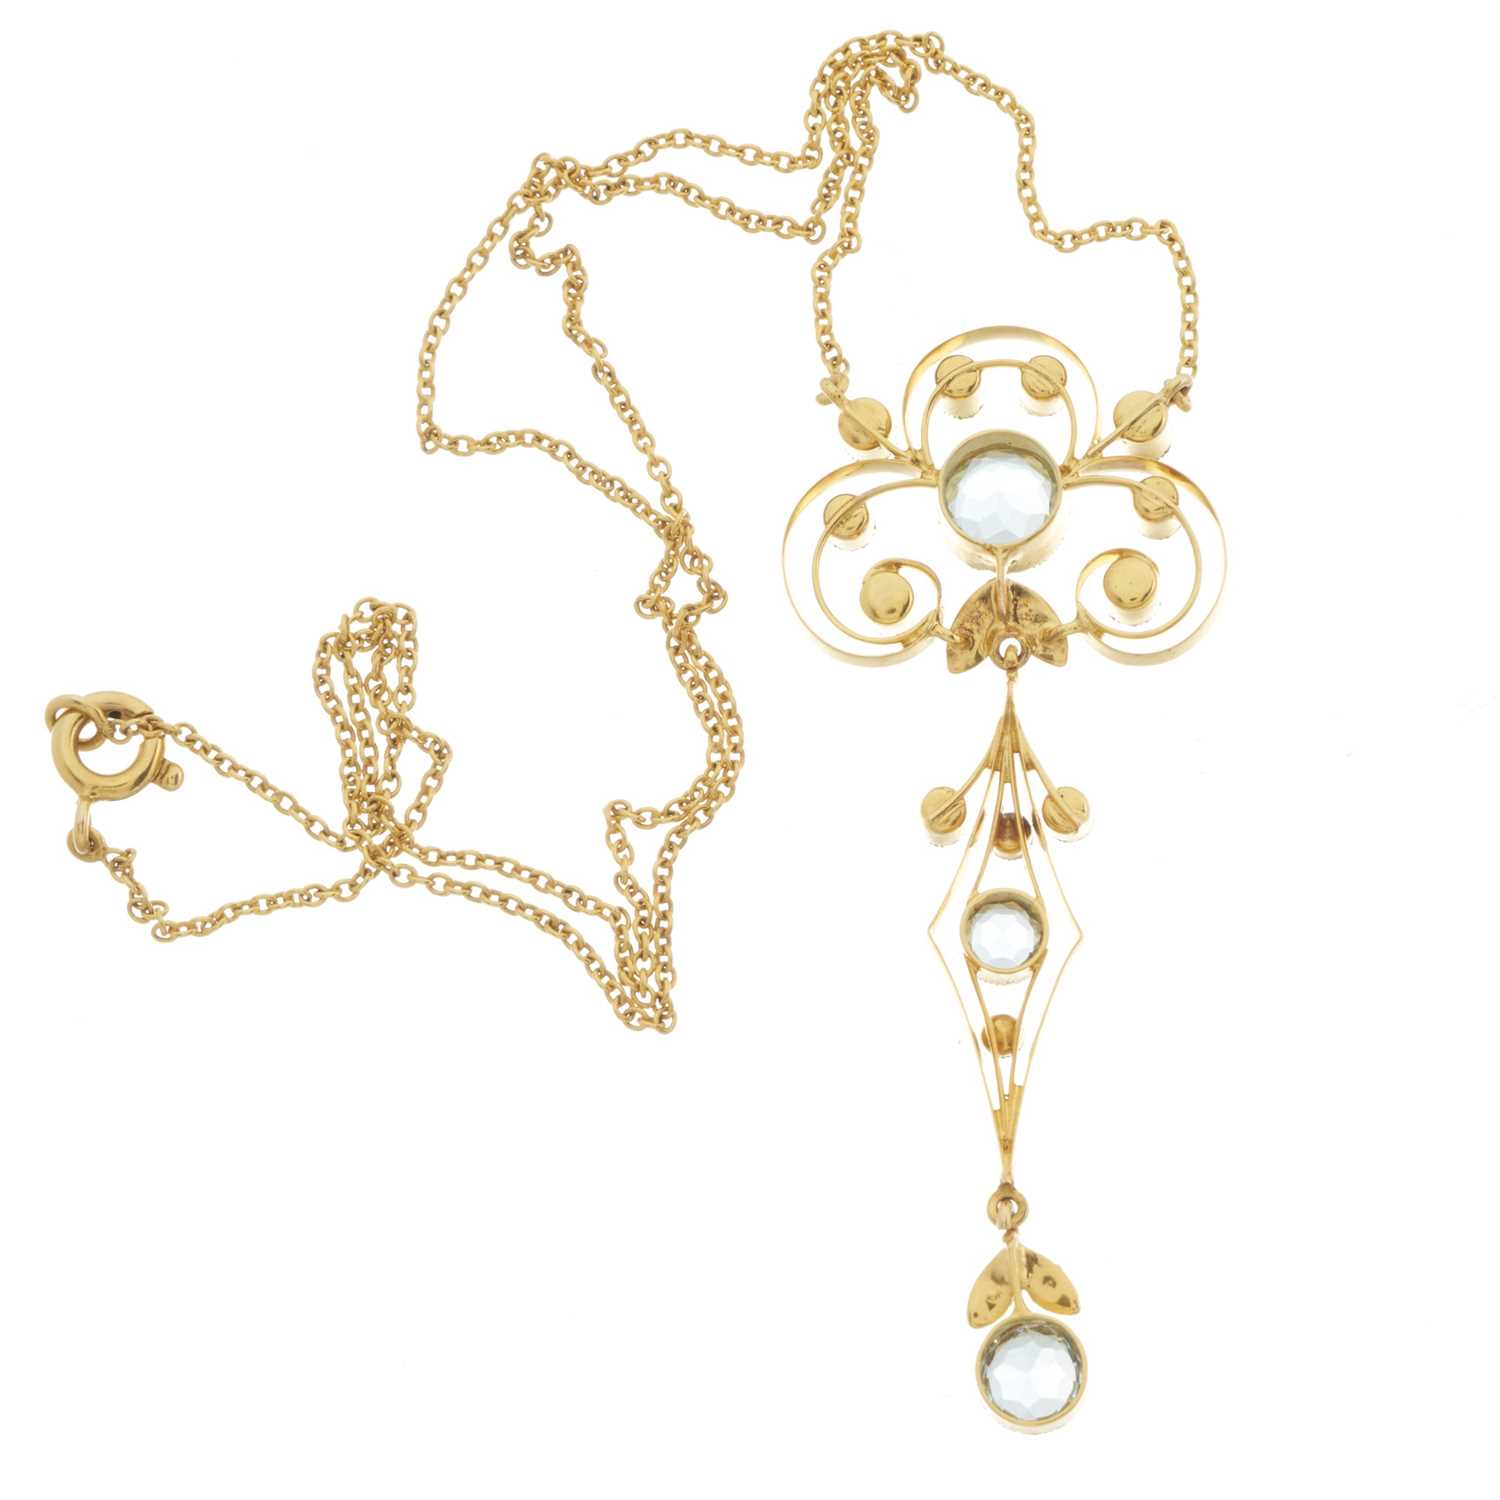 An Edwardian 18ct gold aquamarine and pearl openwork necklace - Image 2 of 2